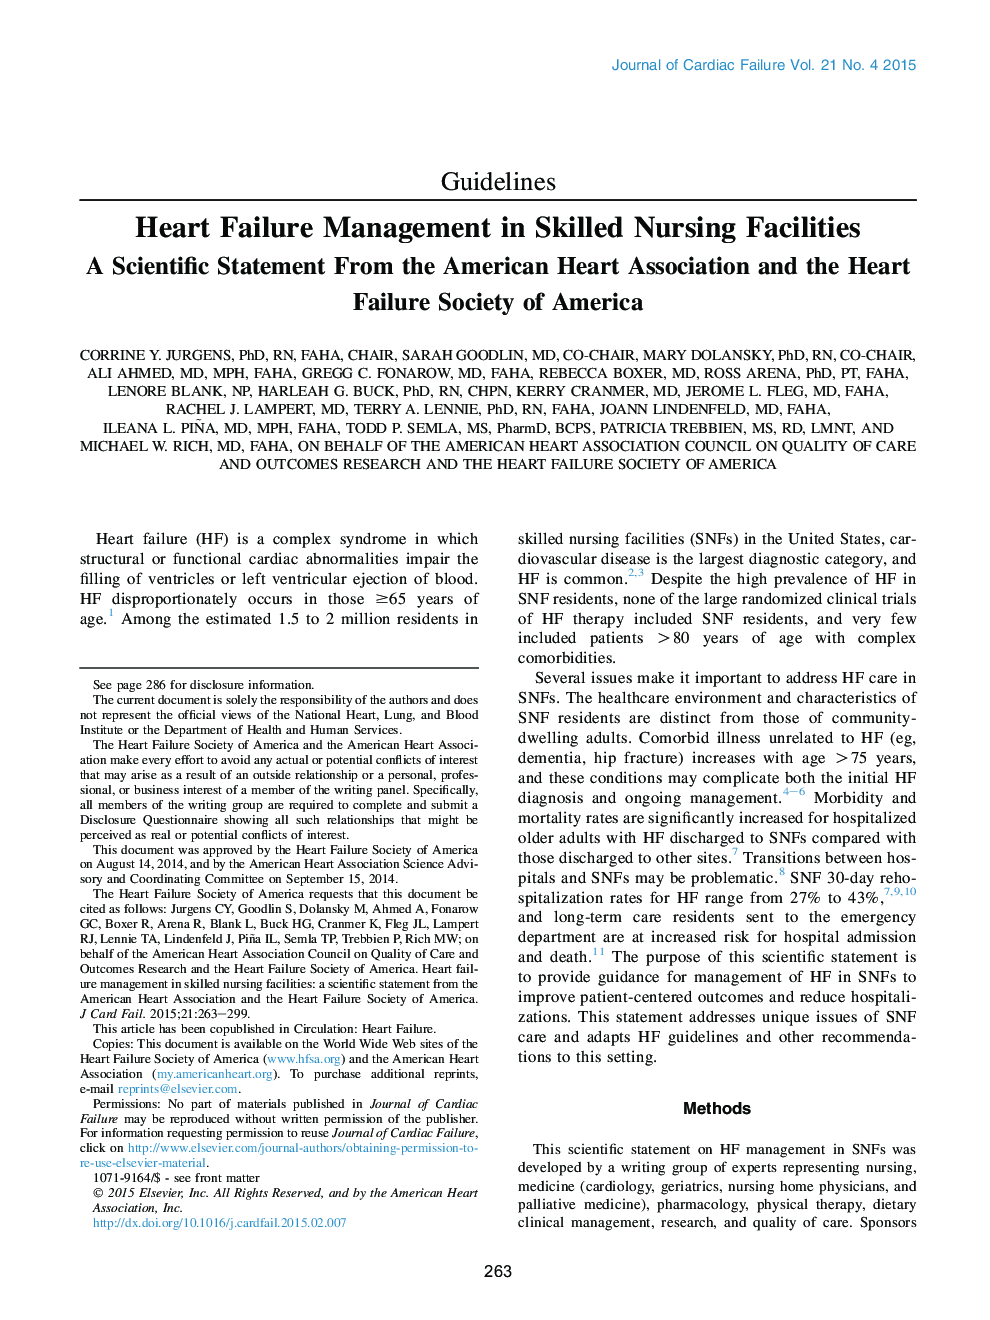 Heart Failure Management in Skilled Nursing Facilities